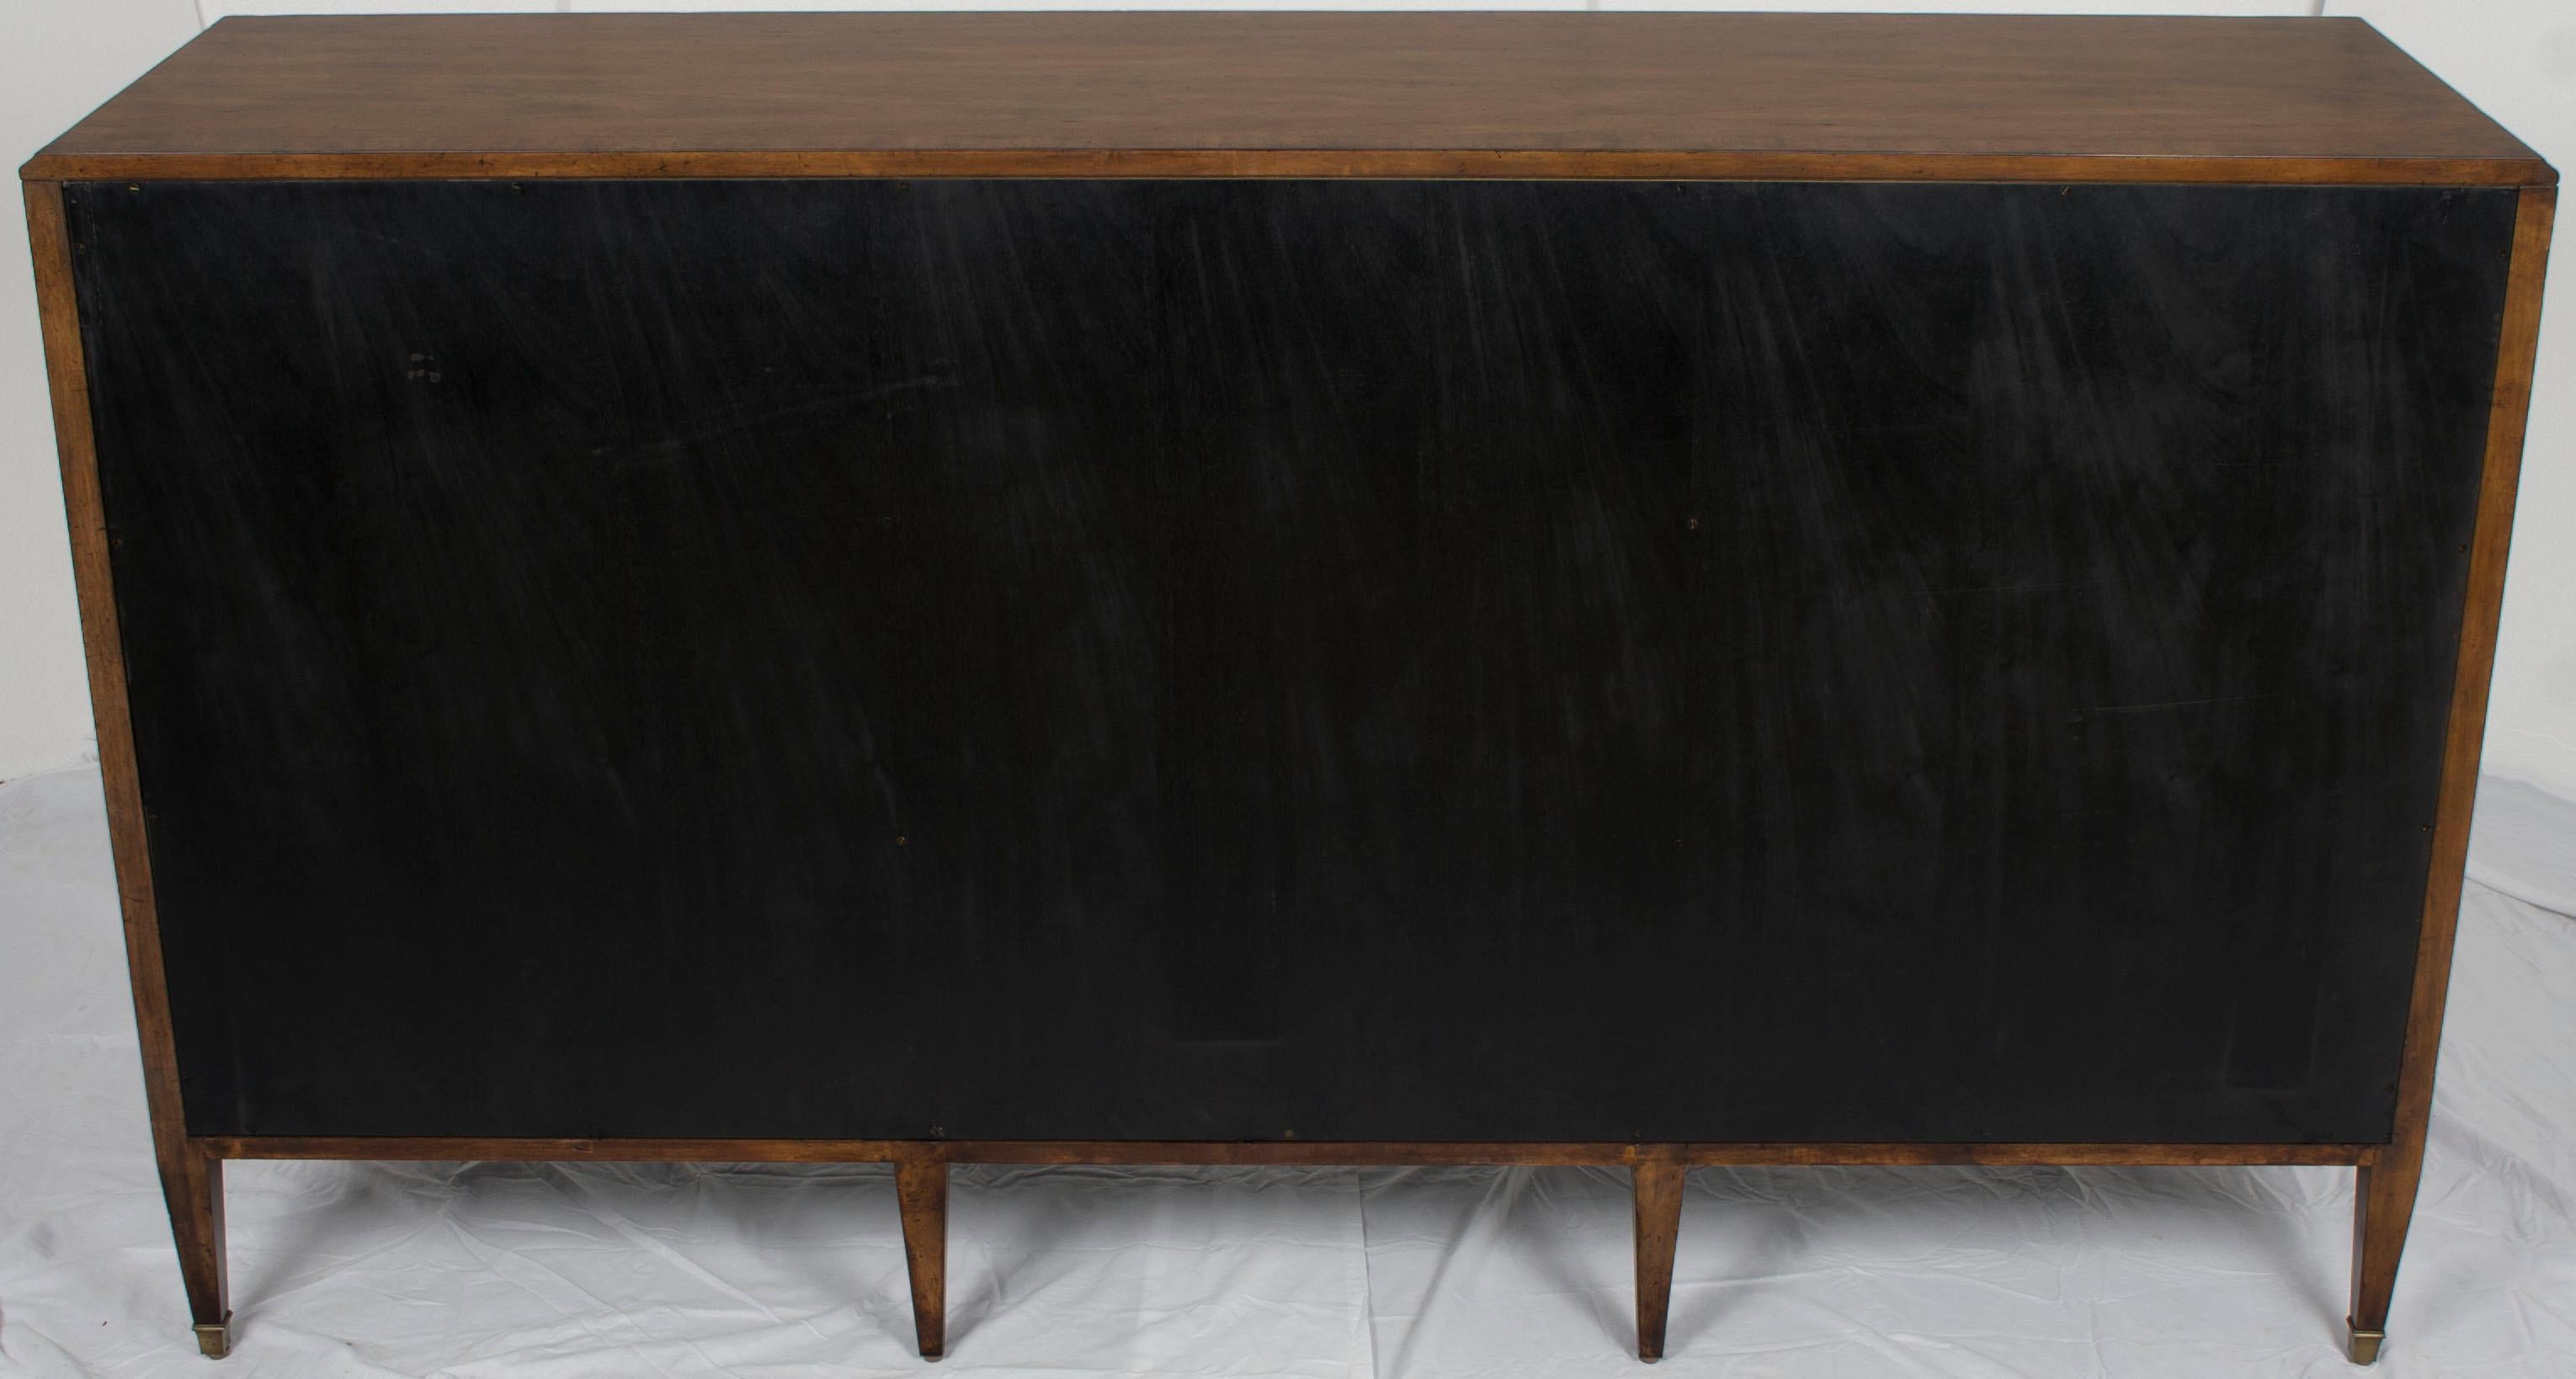 Light Mahogany Distressed Buffet Credenza Sideboard with Antiqued Mirrors 3